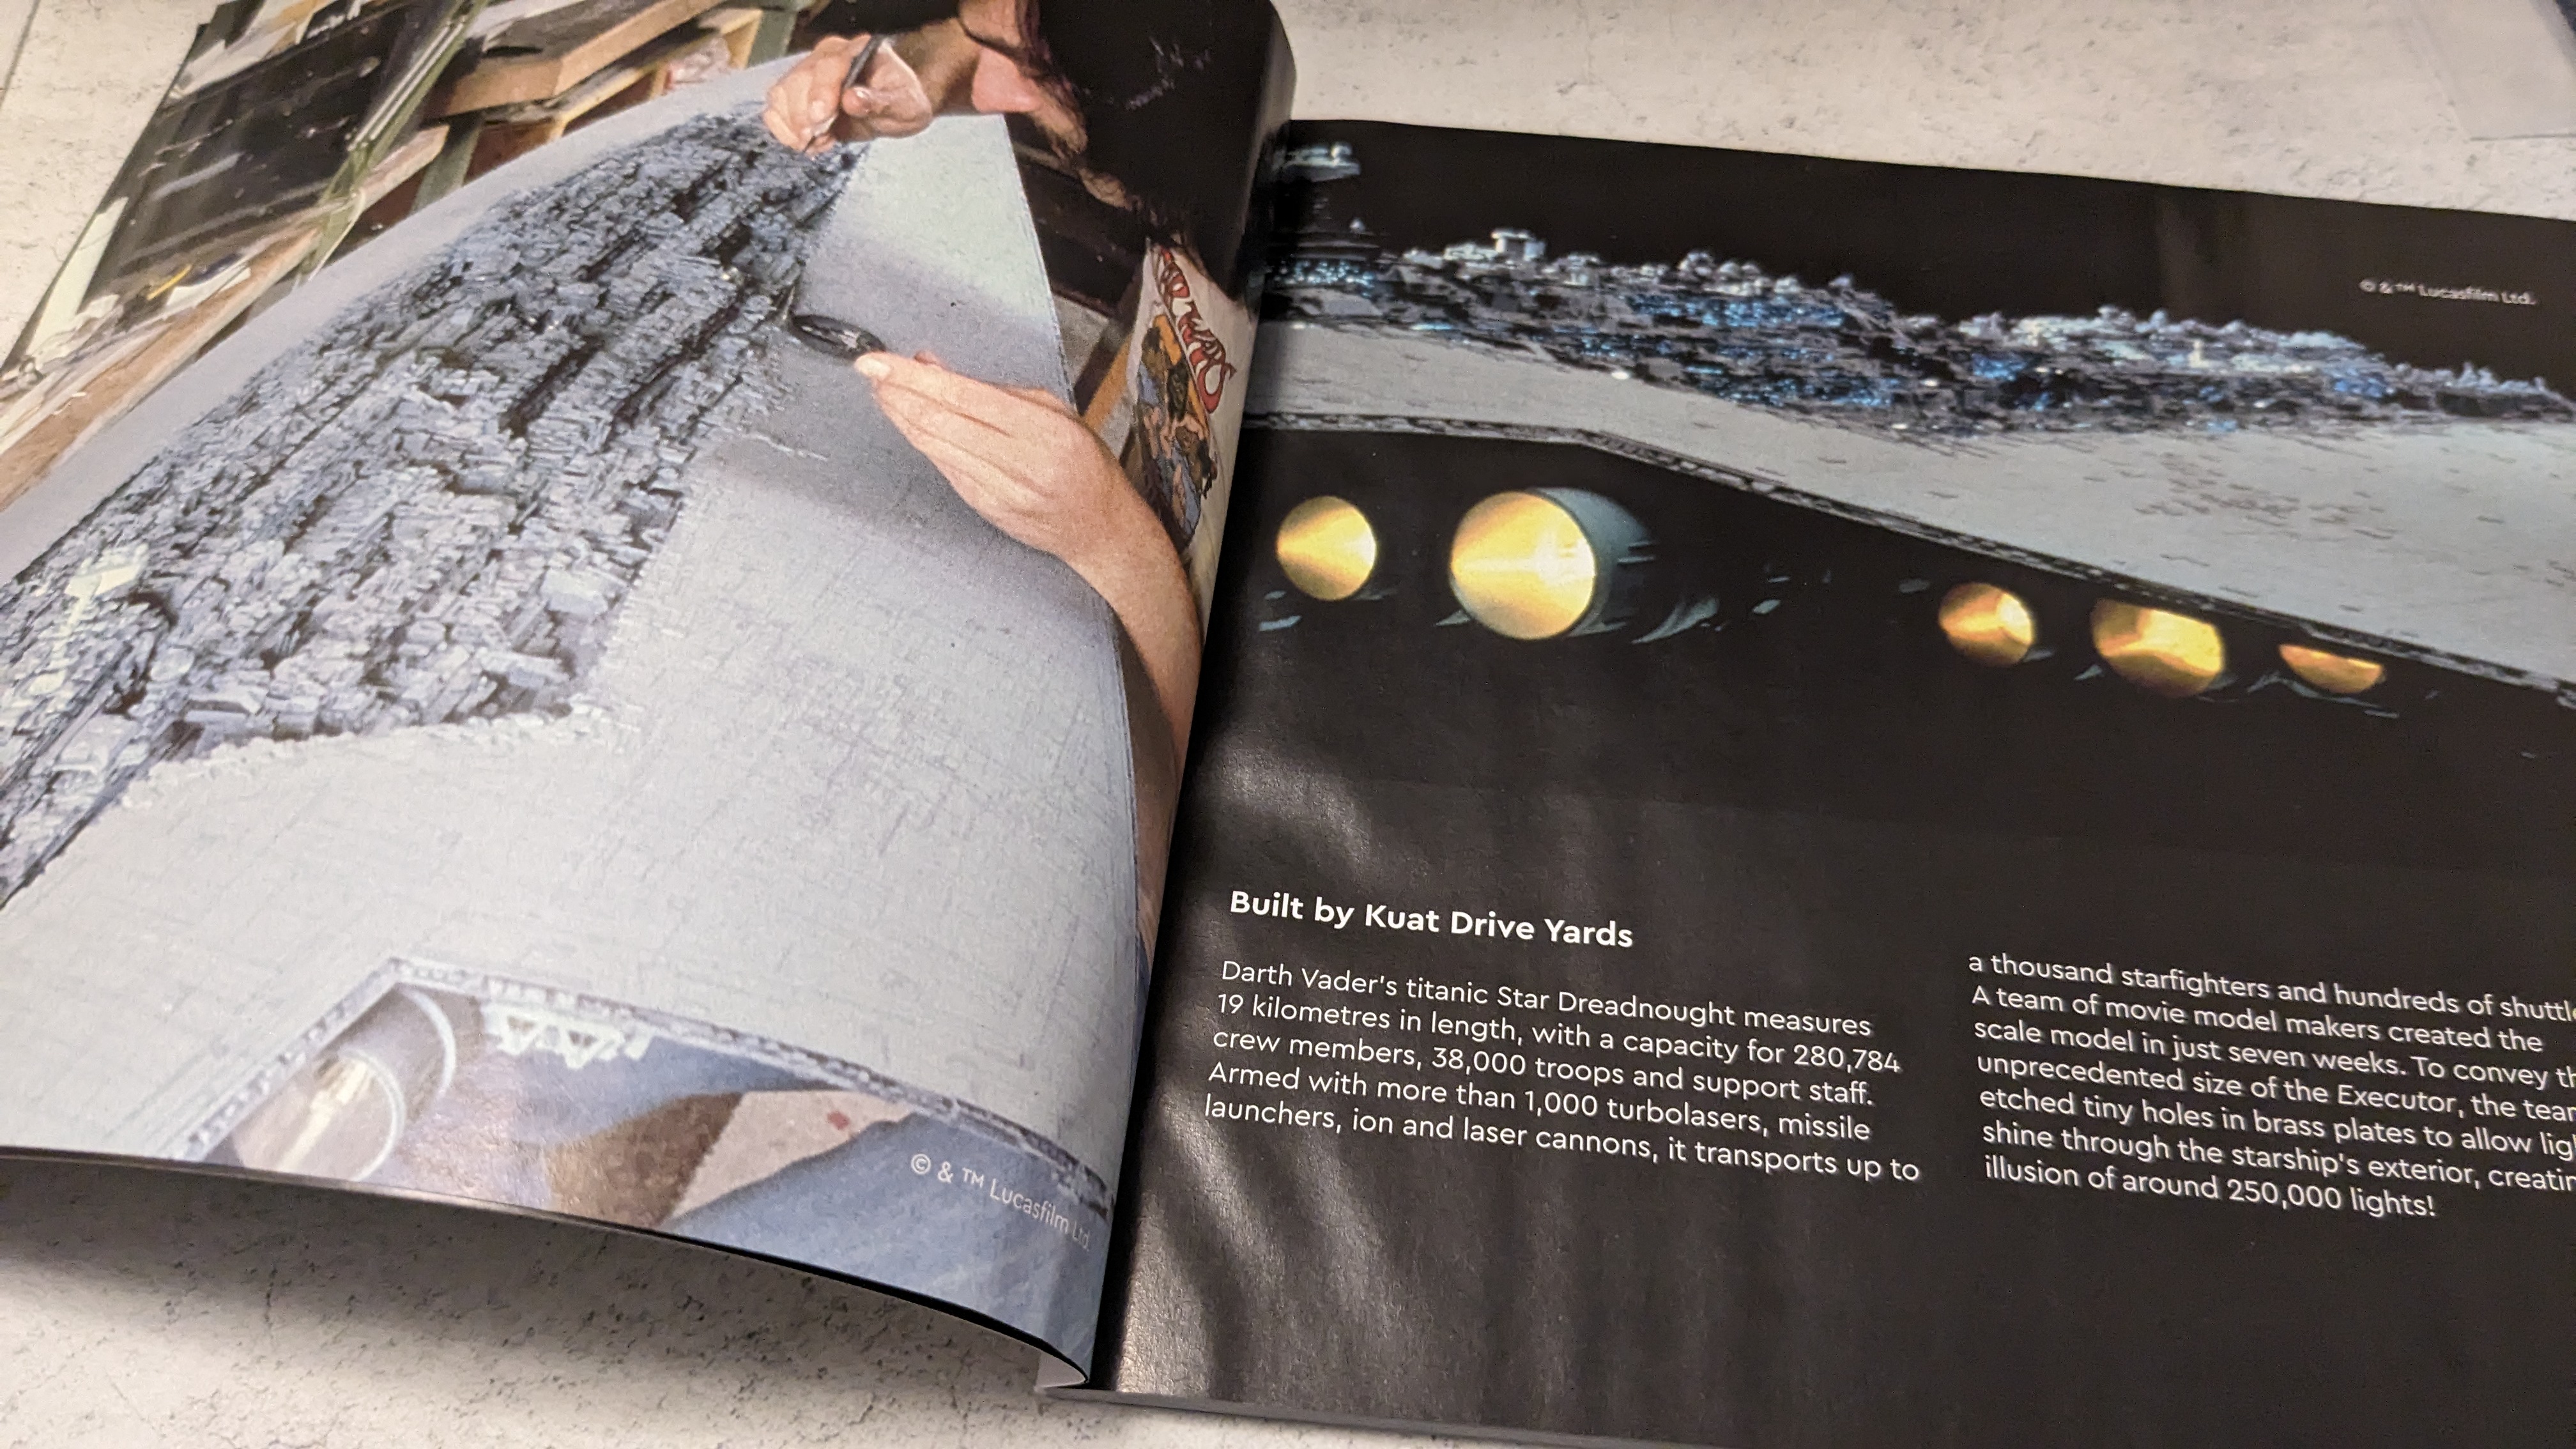 The instruction booklet of the Lego Star Wars Executor Super Star Destroyer, showing information about how the model from the movie was constructed.